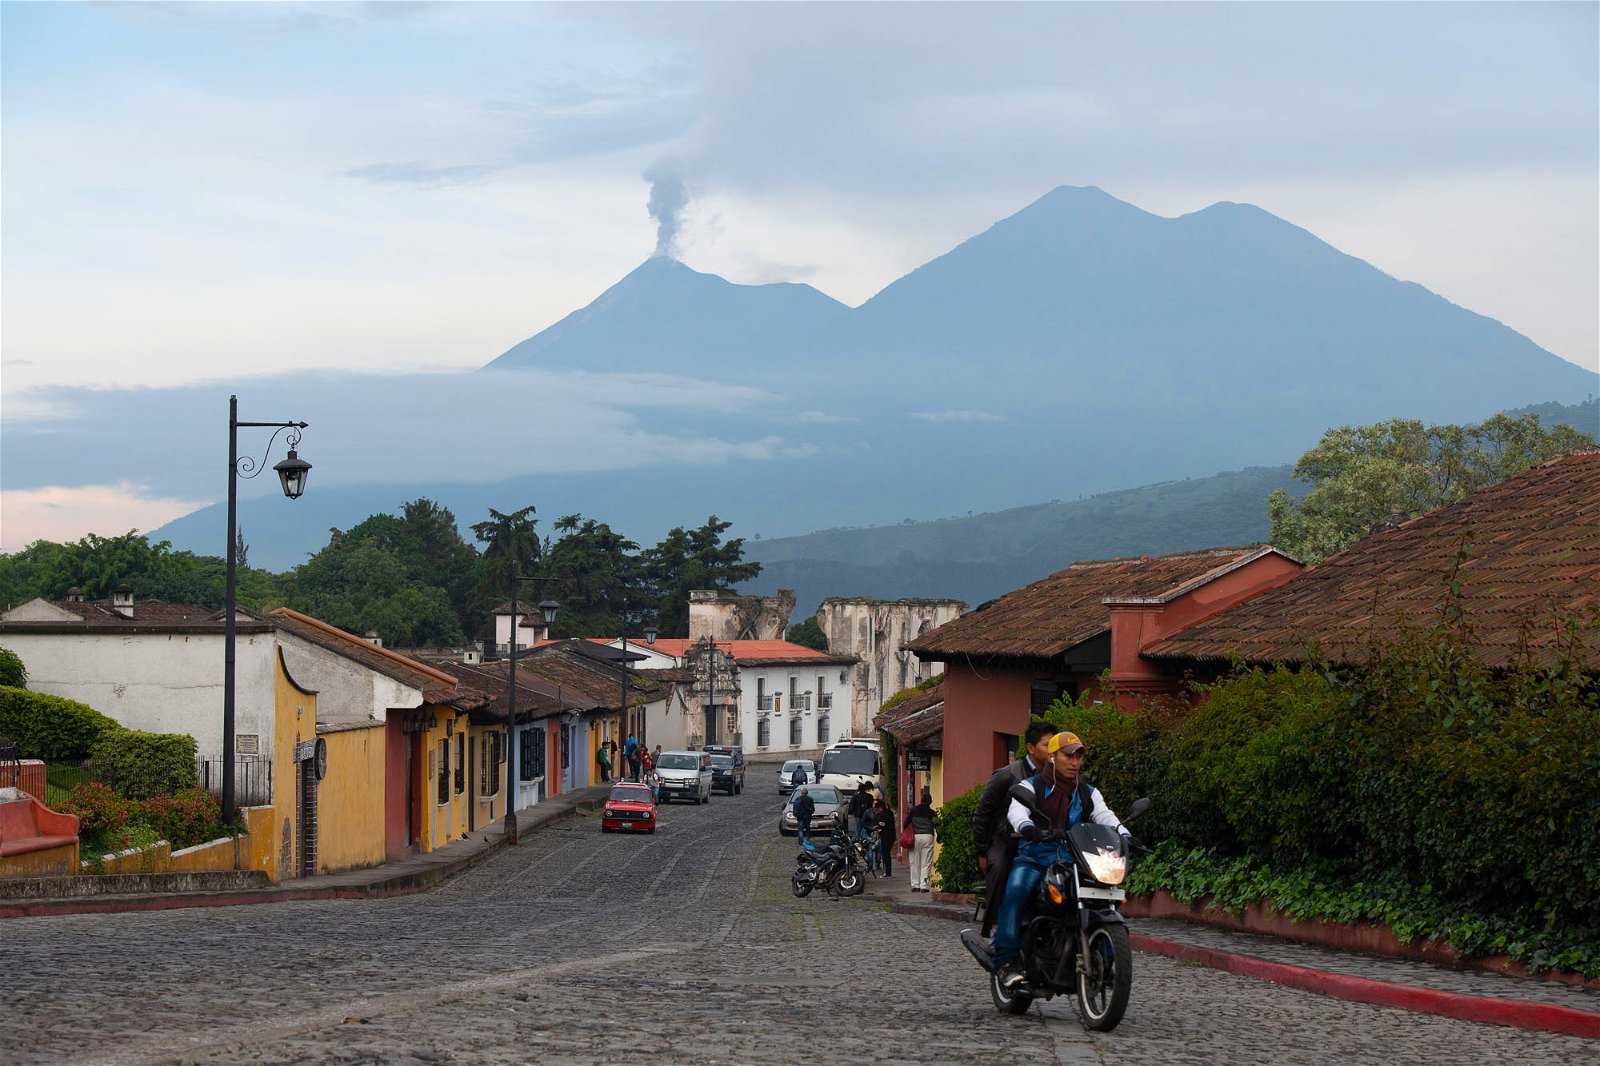 Volcano Fuego recently erupted forcing thousands of distressed residents to flee.